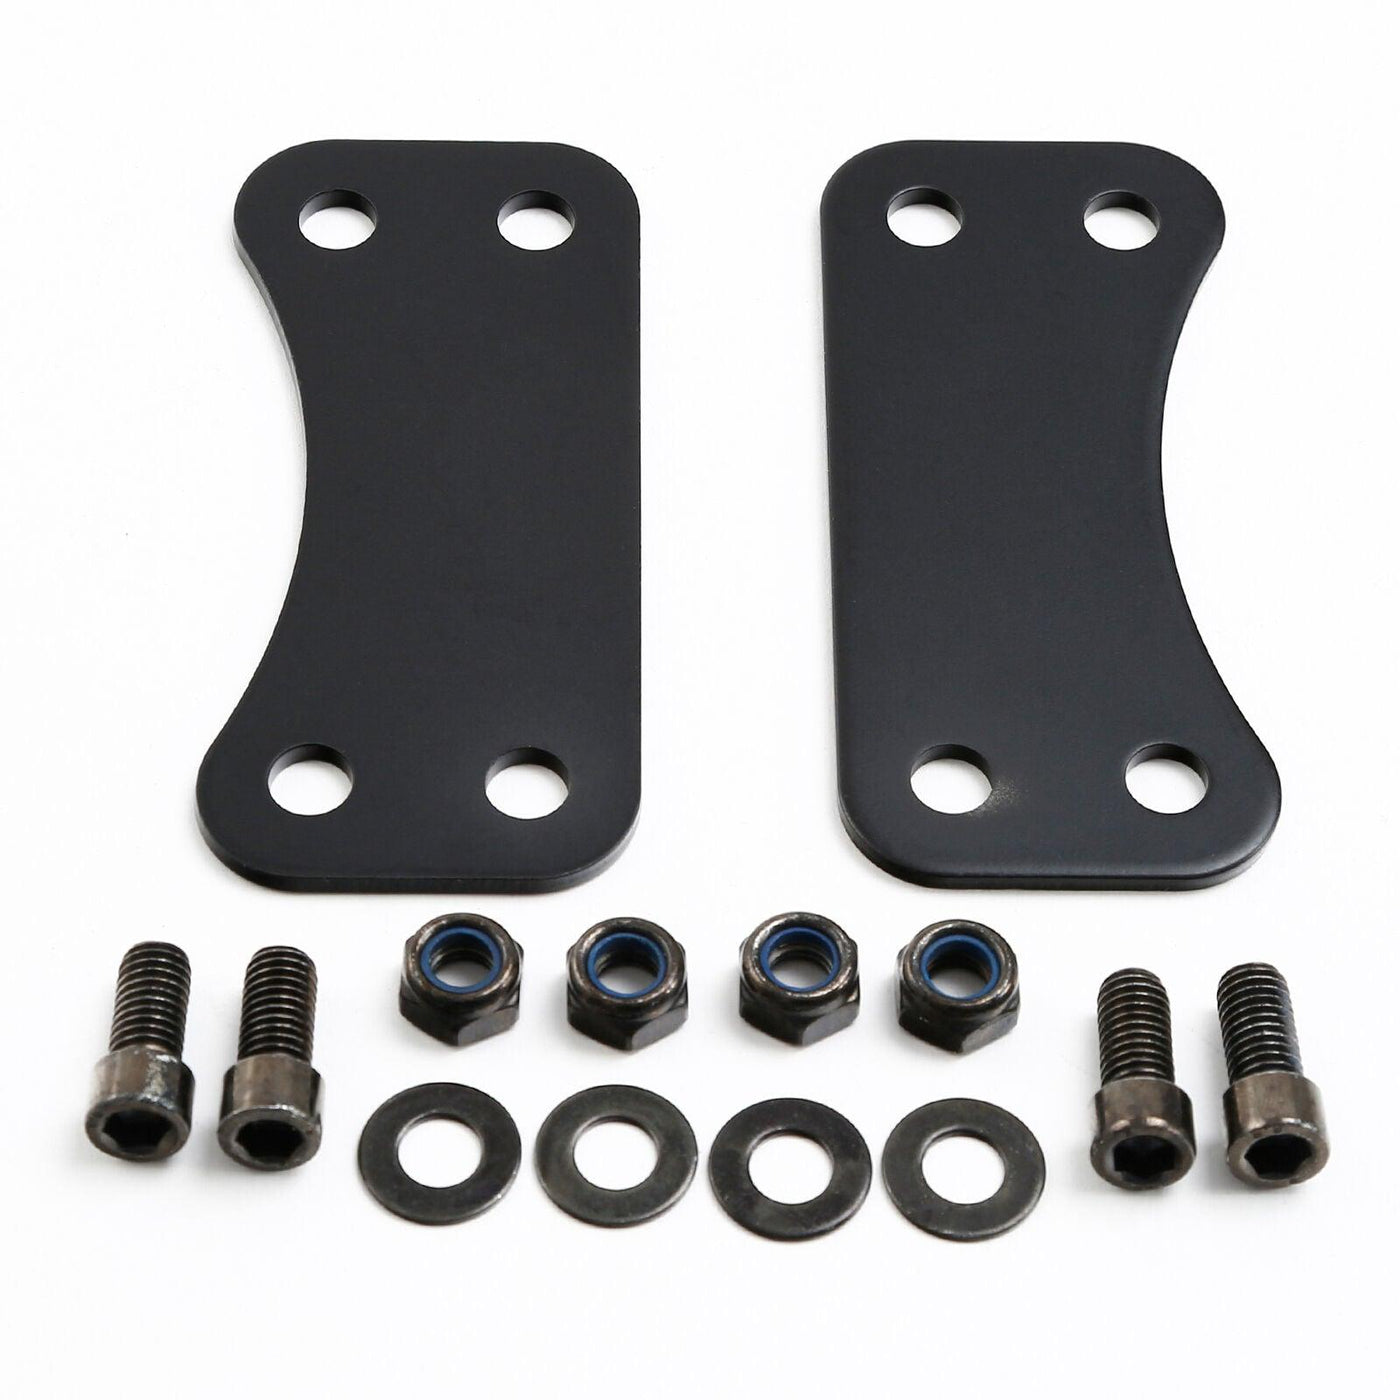 Front 21" Wheel Fender Riser Lift Brackets Fit For Harley Street Glide 2014-2021 - Moto Life Products